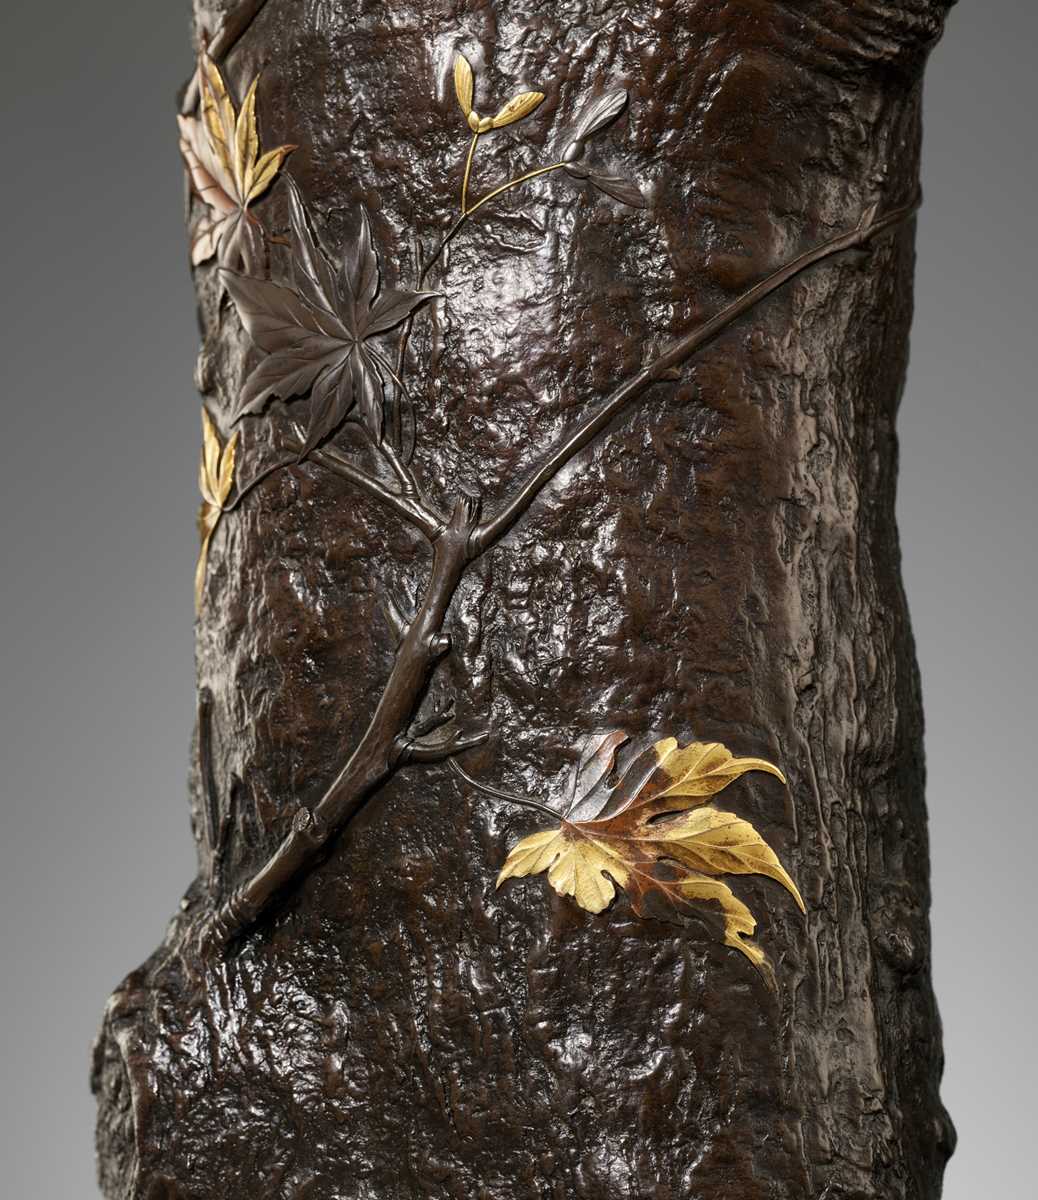 Lot 70 - A MASTERFUL PARCEL-GILT BRONZE VASE DEPICTING A TREE TRUNK WITH AUTUMN LEAVES